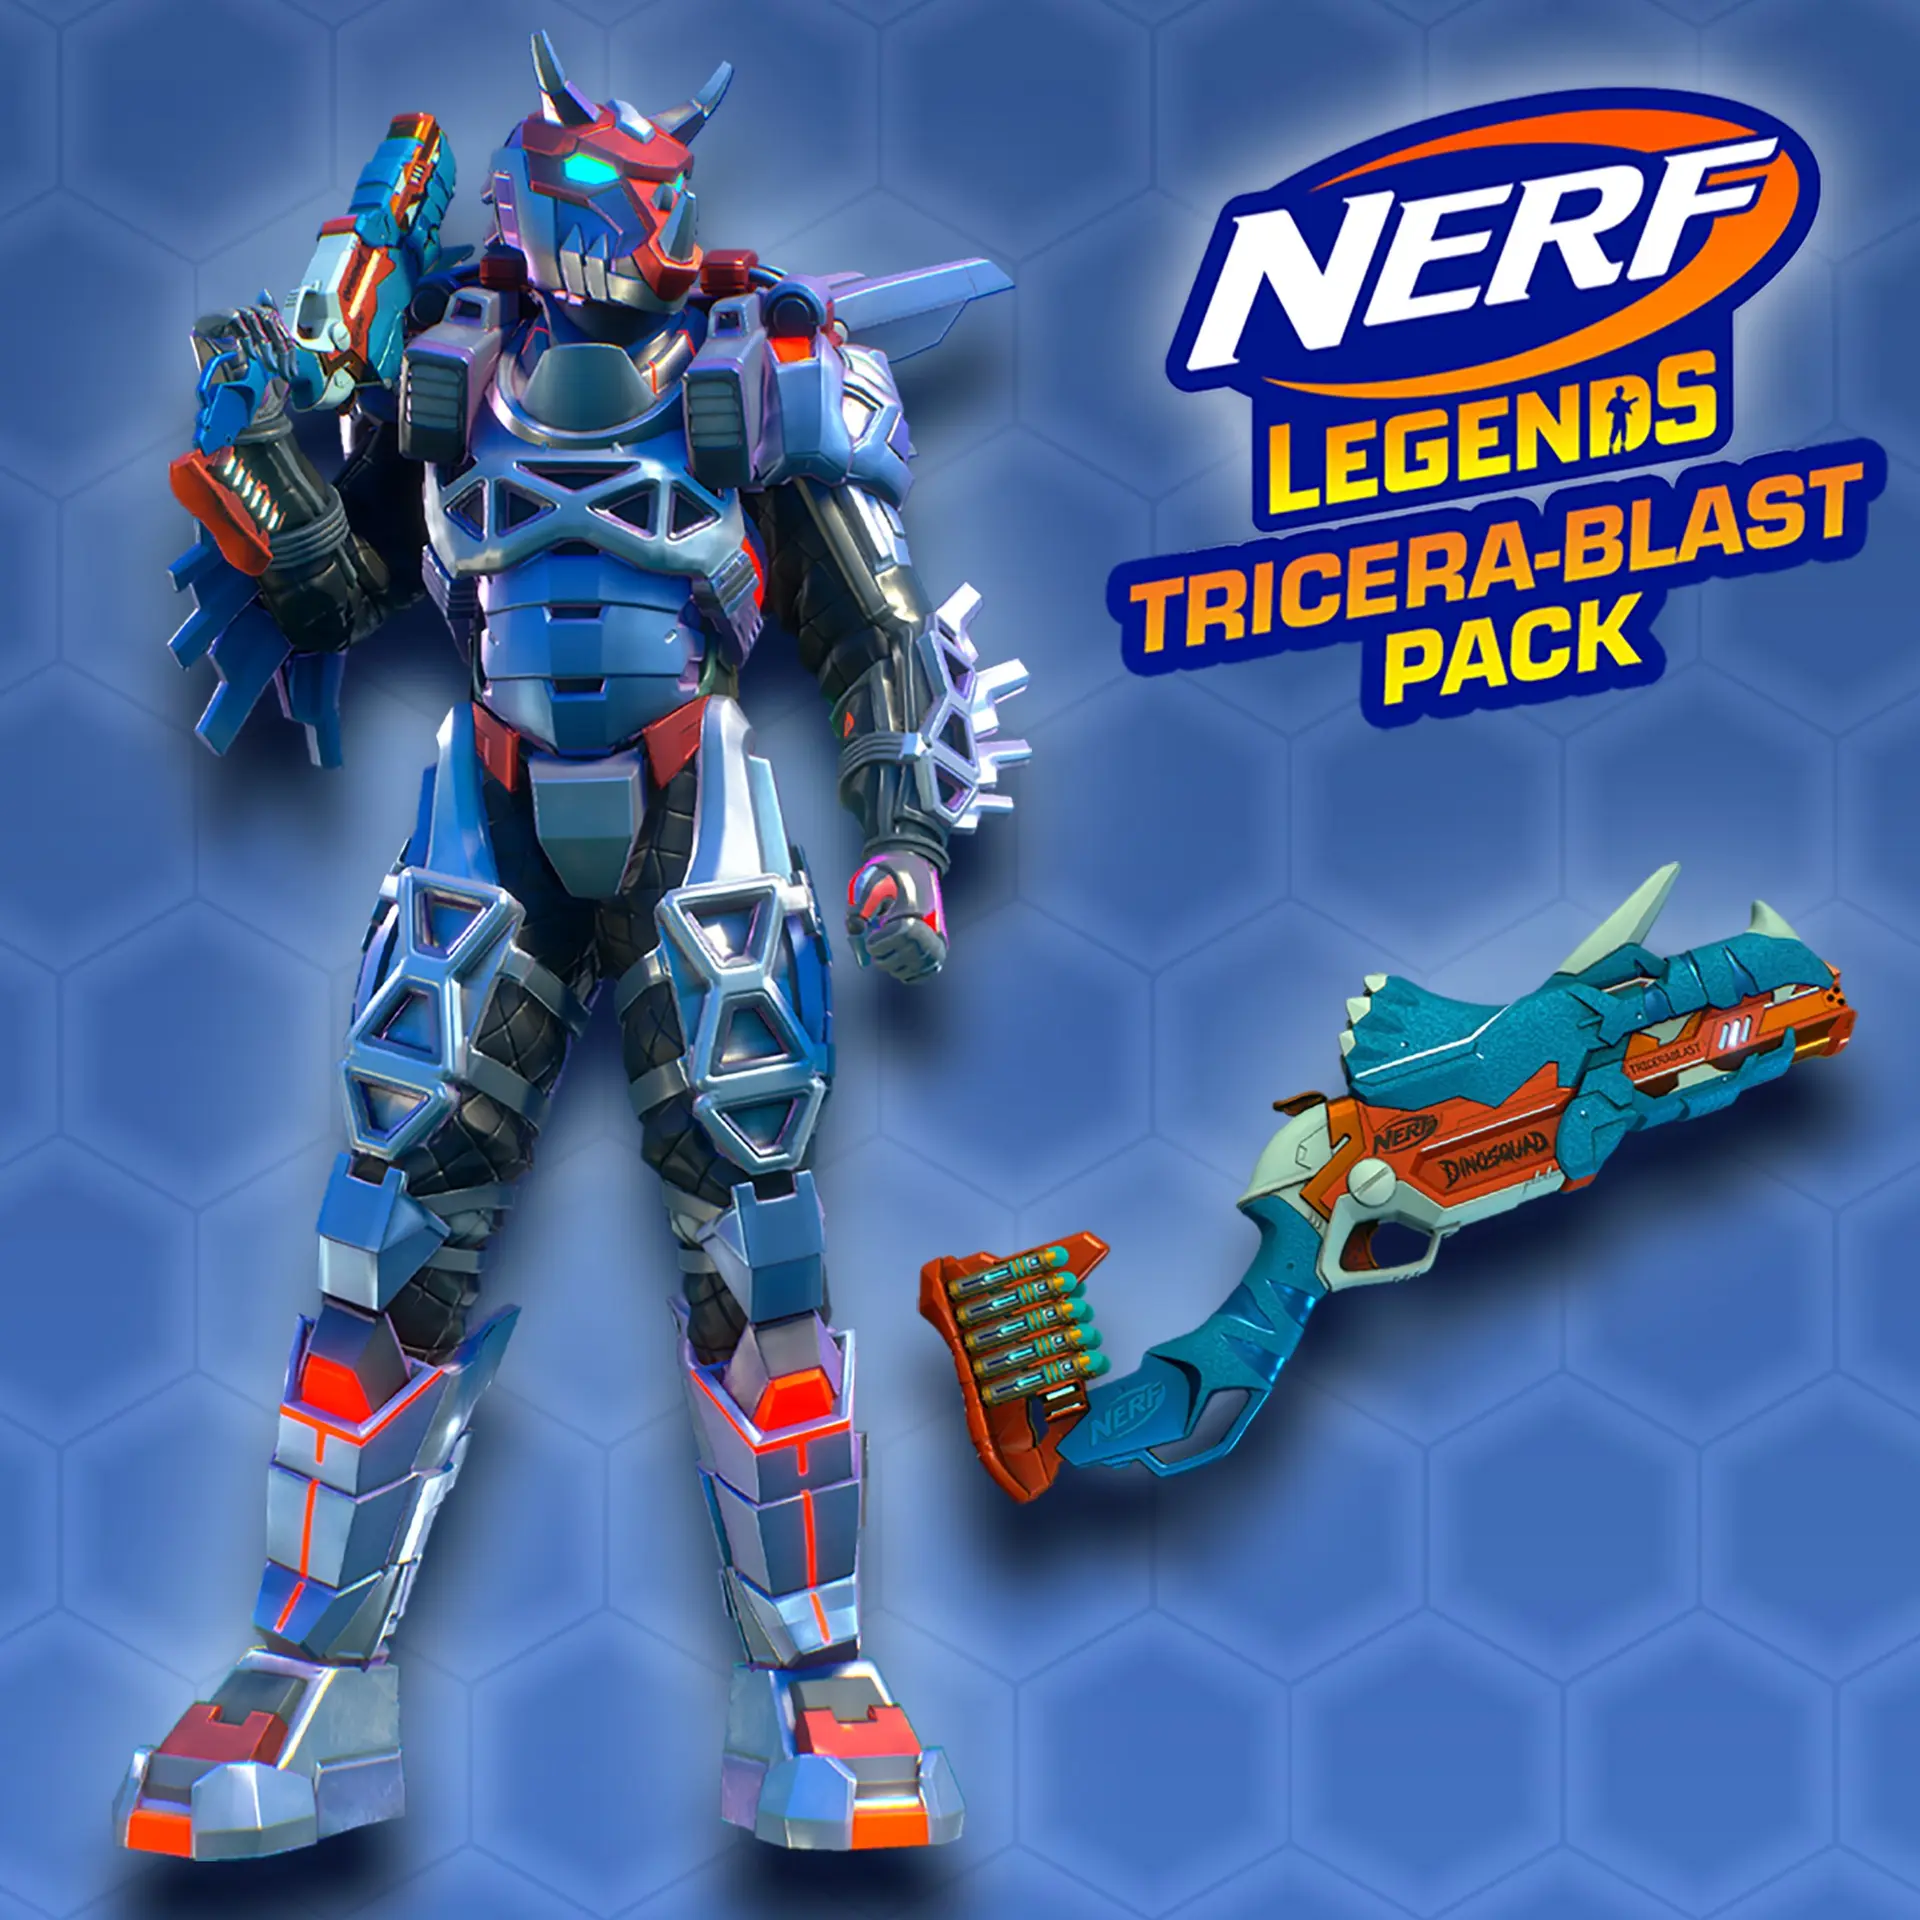 NERF Legends - Tricera-Blast Pack (XBOX One - Cheapest Store)